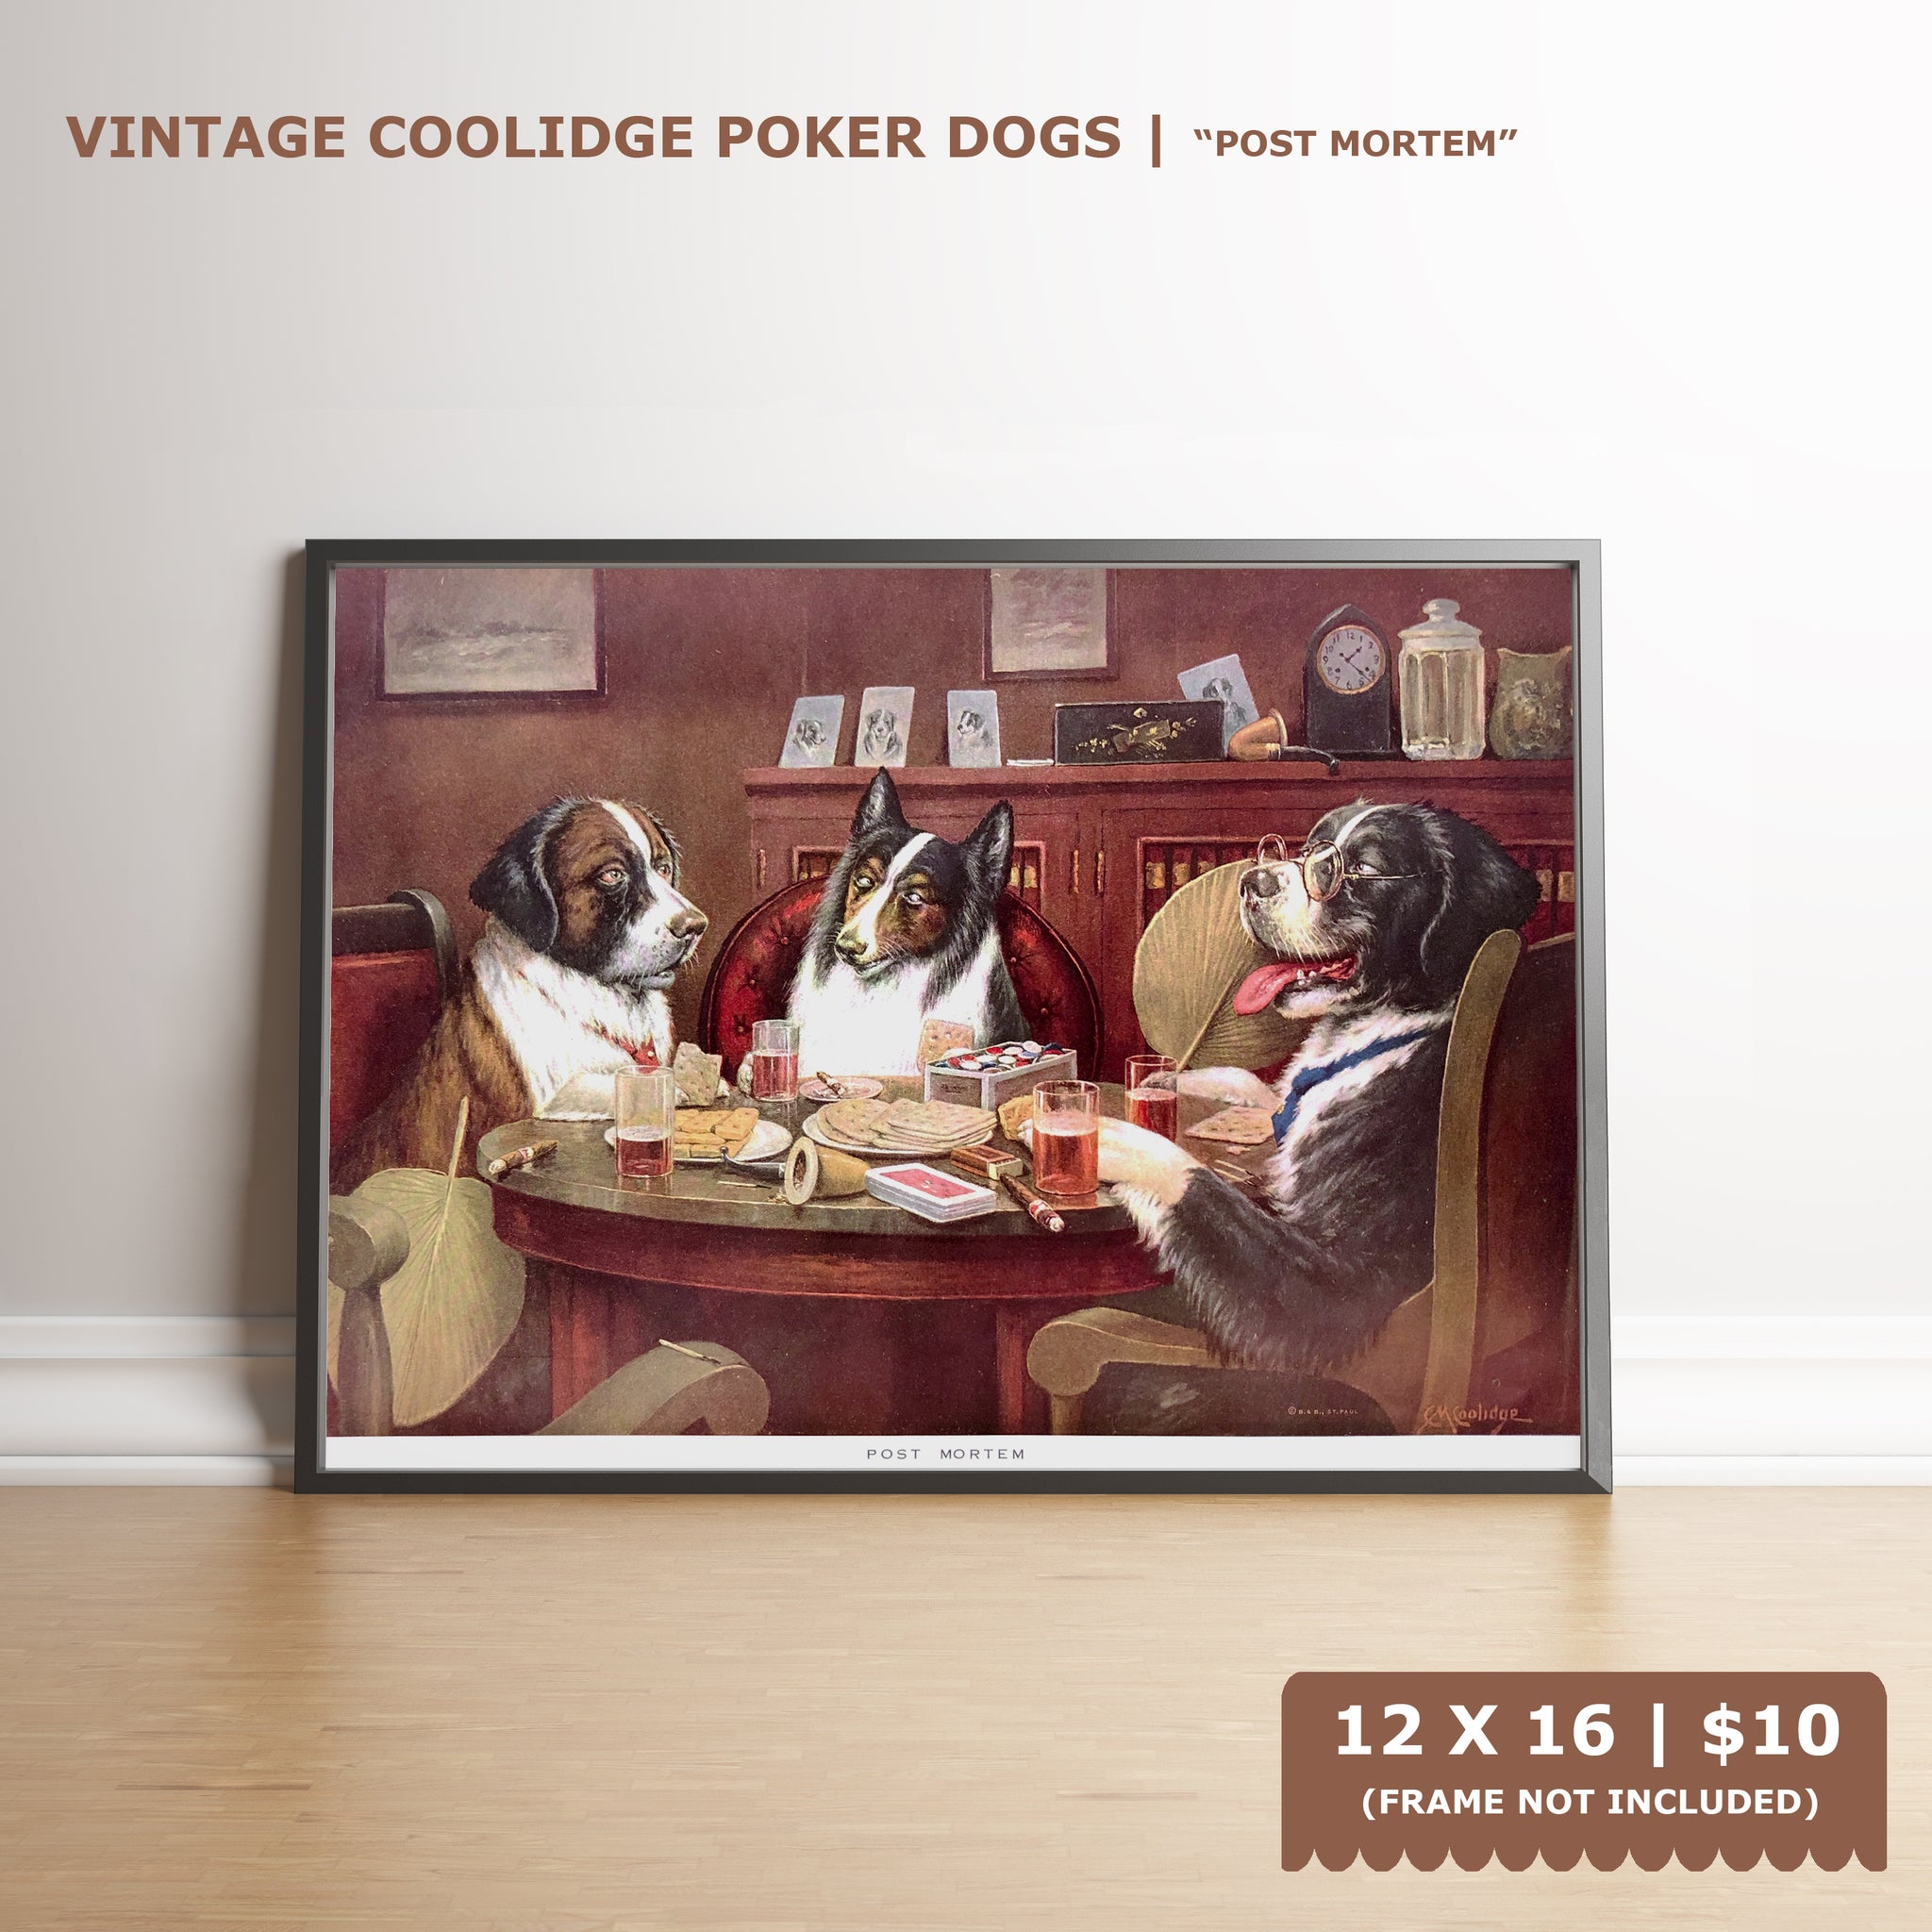 Dogs Playing Poker - Post mortem - Marcellus Coolidge Art Print - 12x16 - West Coast Picture Frames LLC